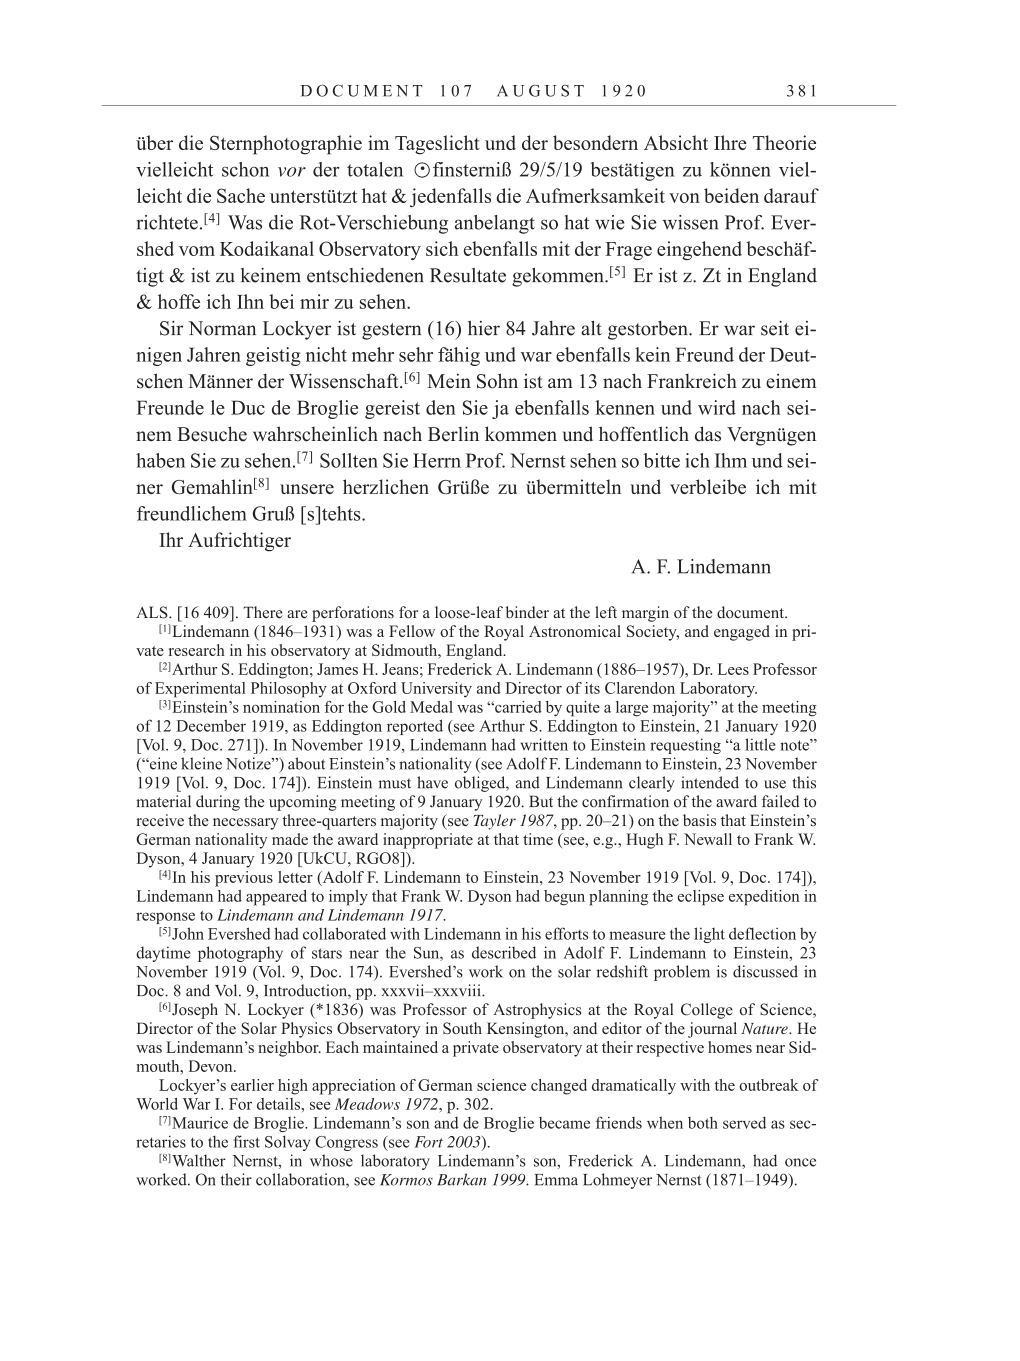 Volume 10: The Berlin Years: Correspondence May-December 1920 / Supplementary Correspondence 1909-1920 page 381